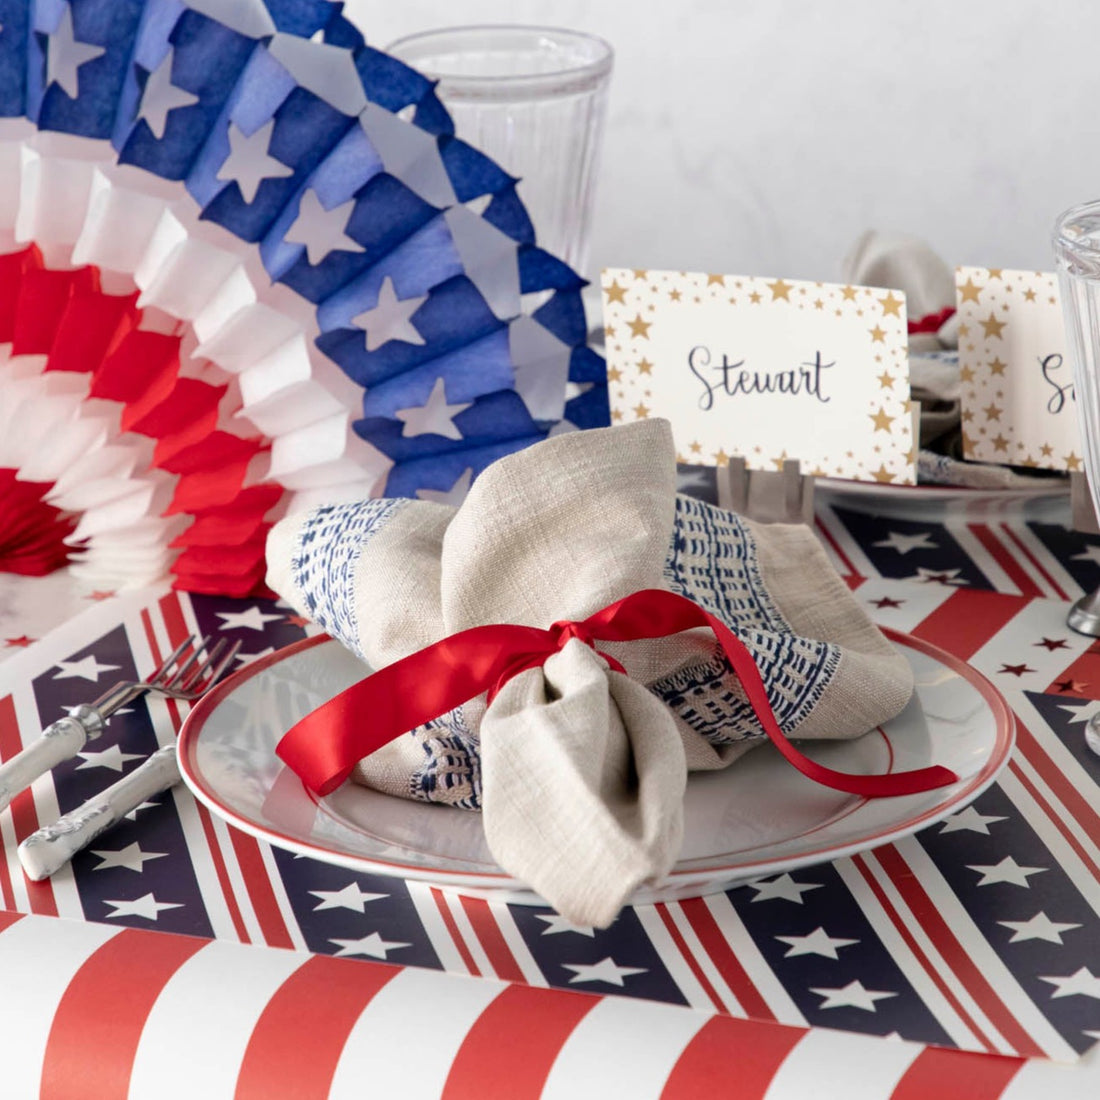 The Stars and Stripes Placemat under a patriotic place setting.